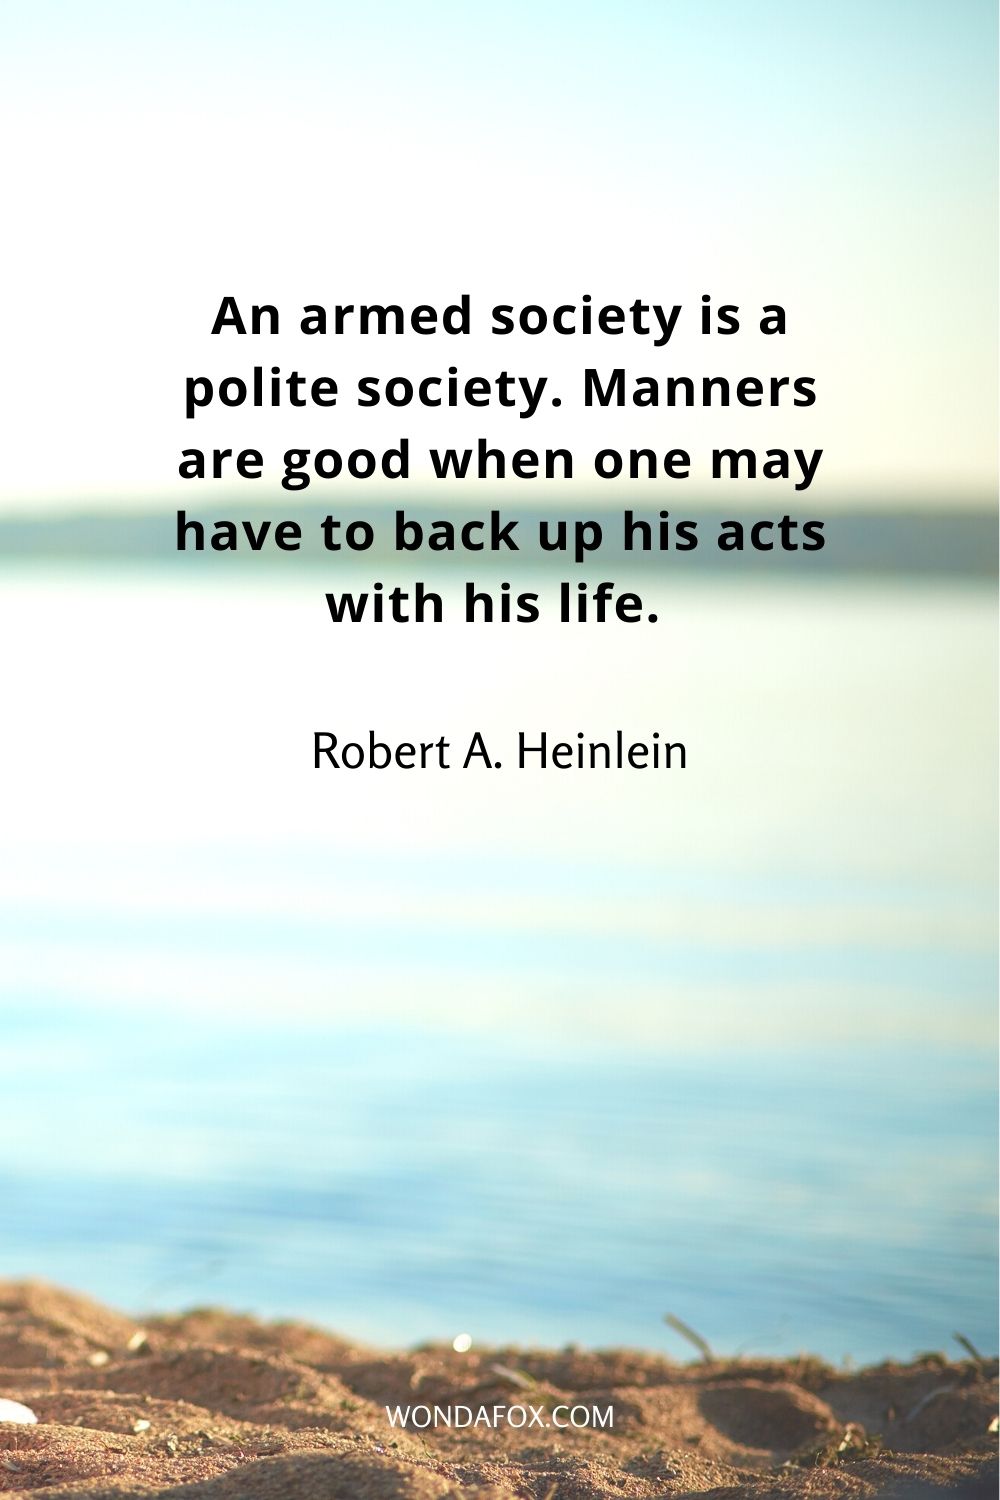 An armed society is a polite society. Manners are good when one may have to back up his acts with his life. 